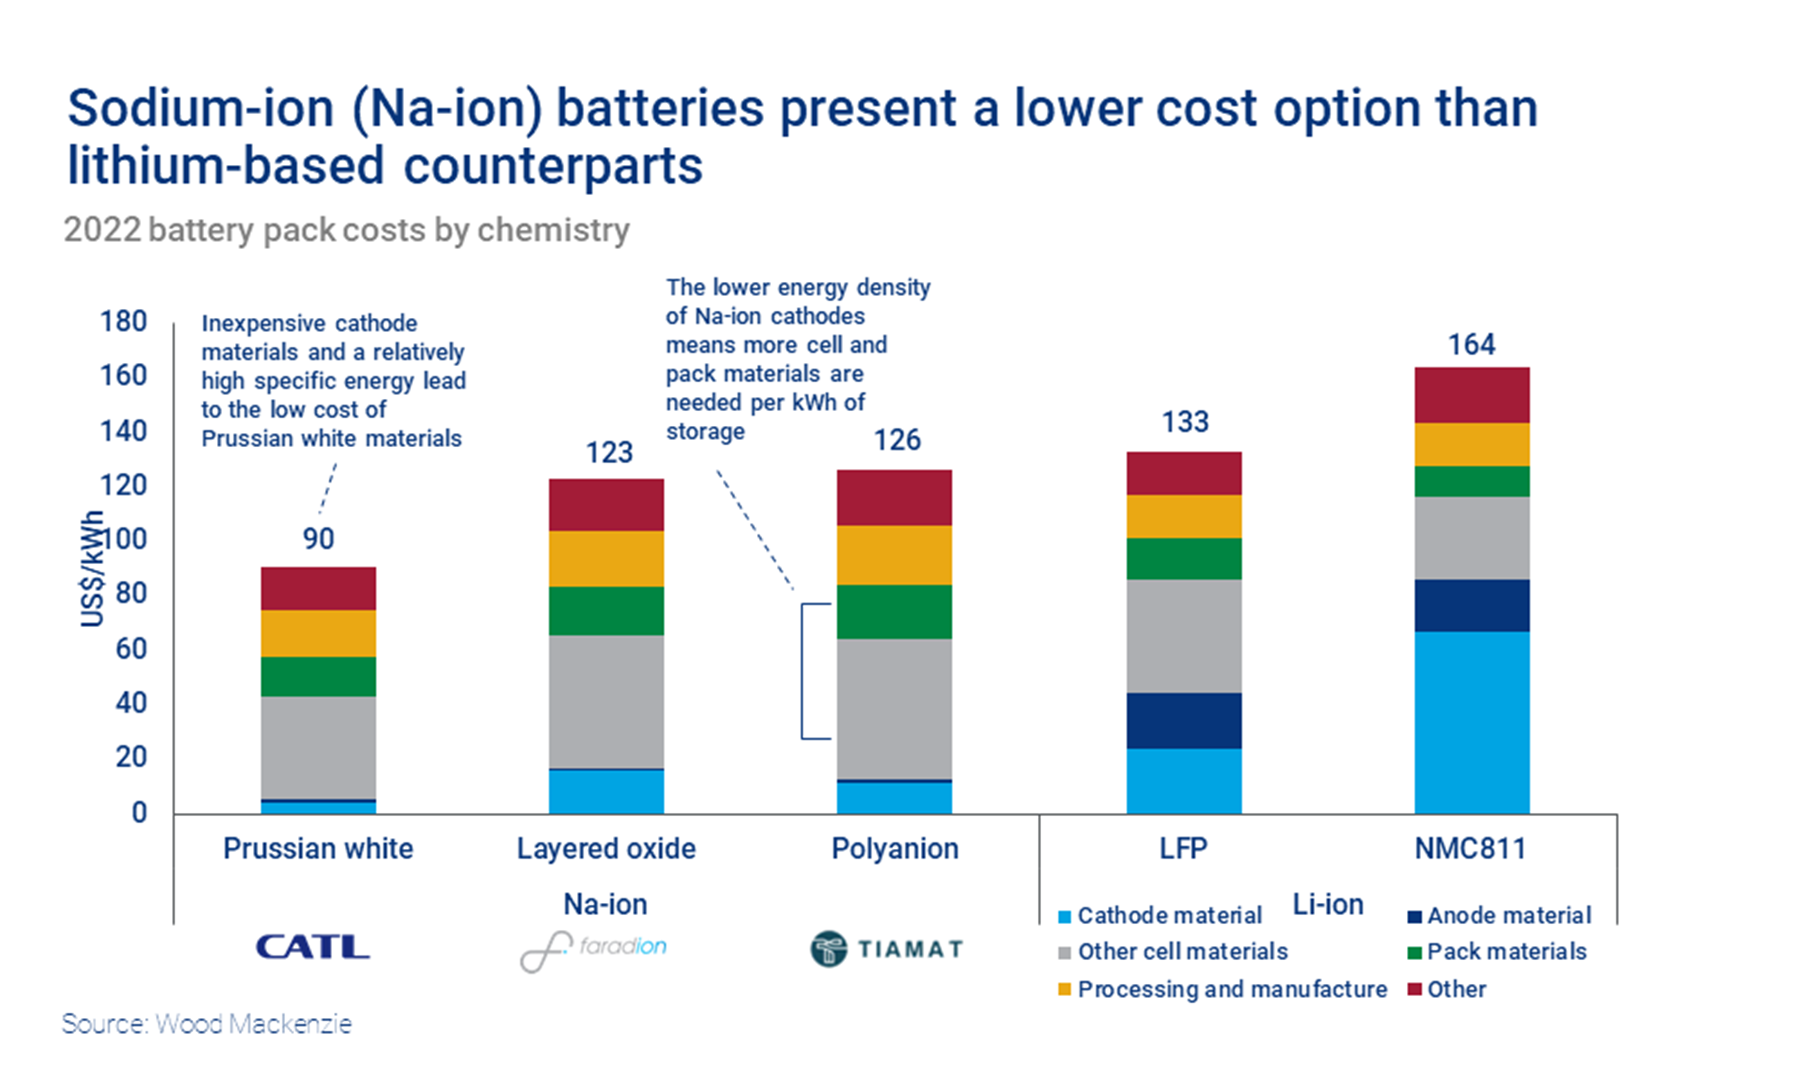 Sodiumion batteries disrupt and conquer? Wood Mackenzie